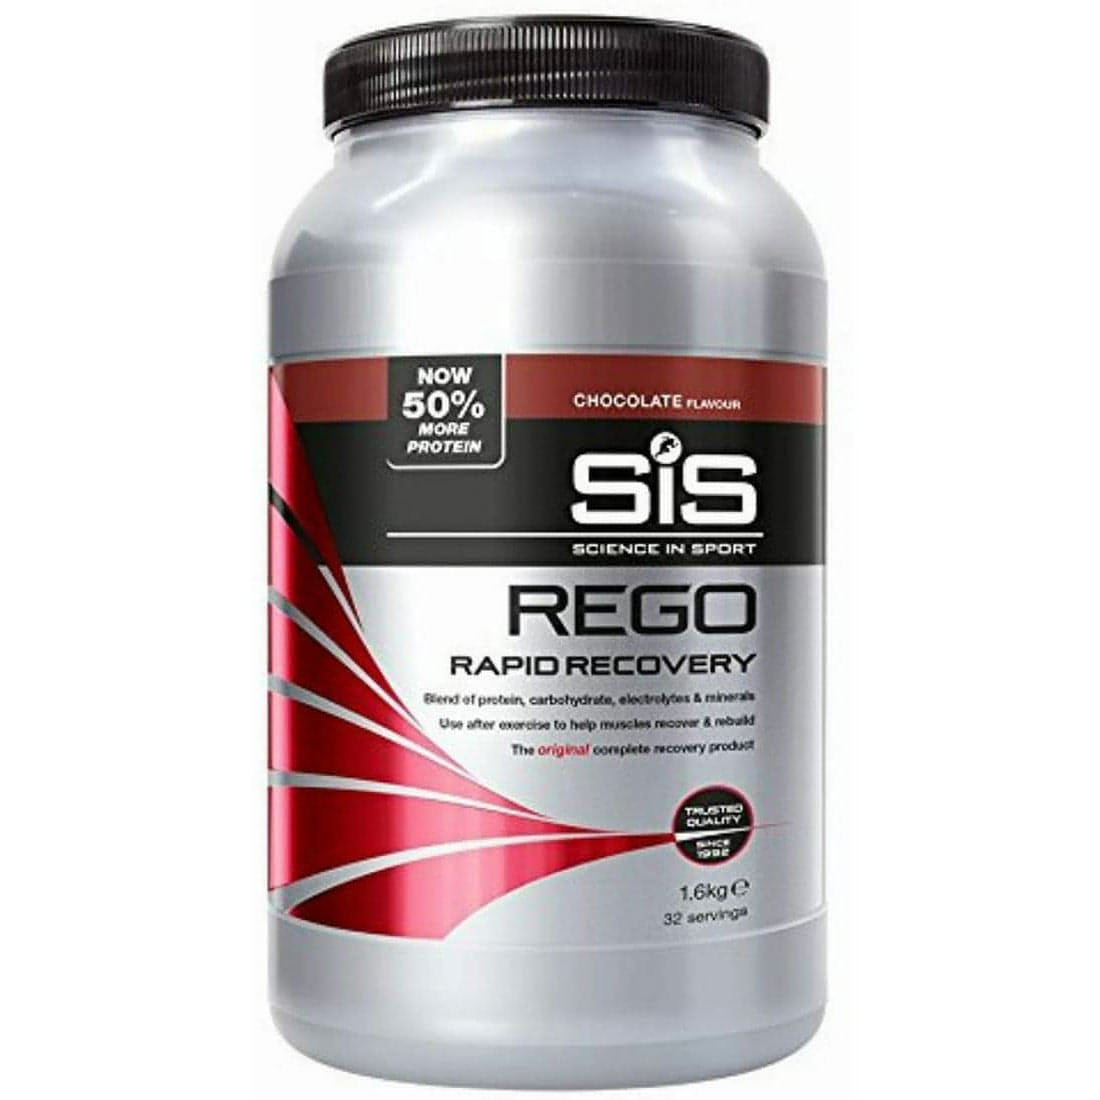 SiS REGO Rapid Recovery Powder - 1.6kg 5025324007165 - Start Fitness